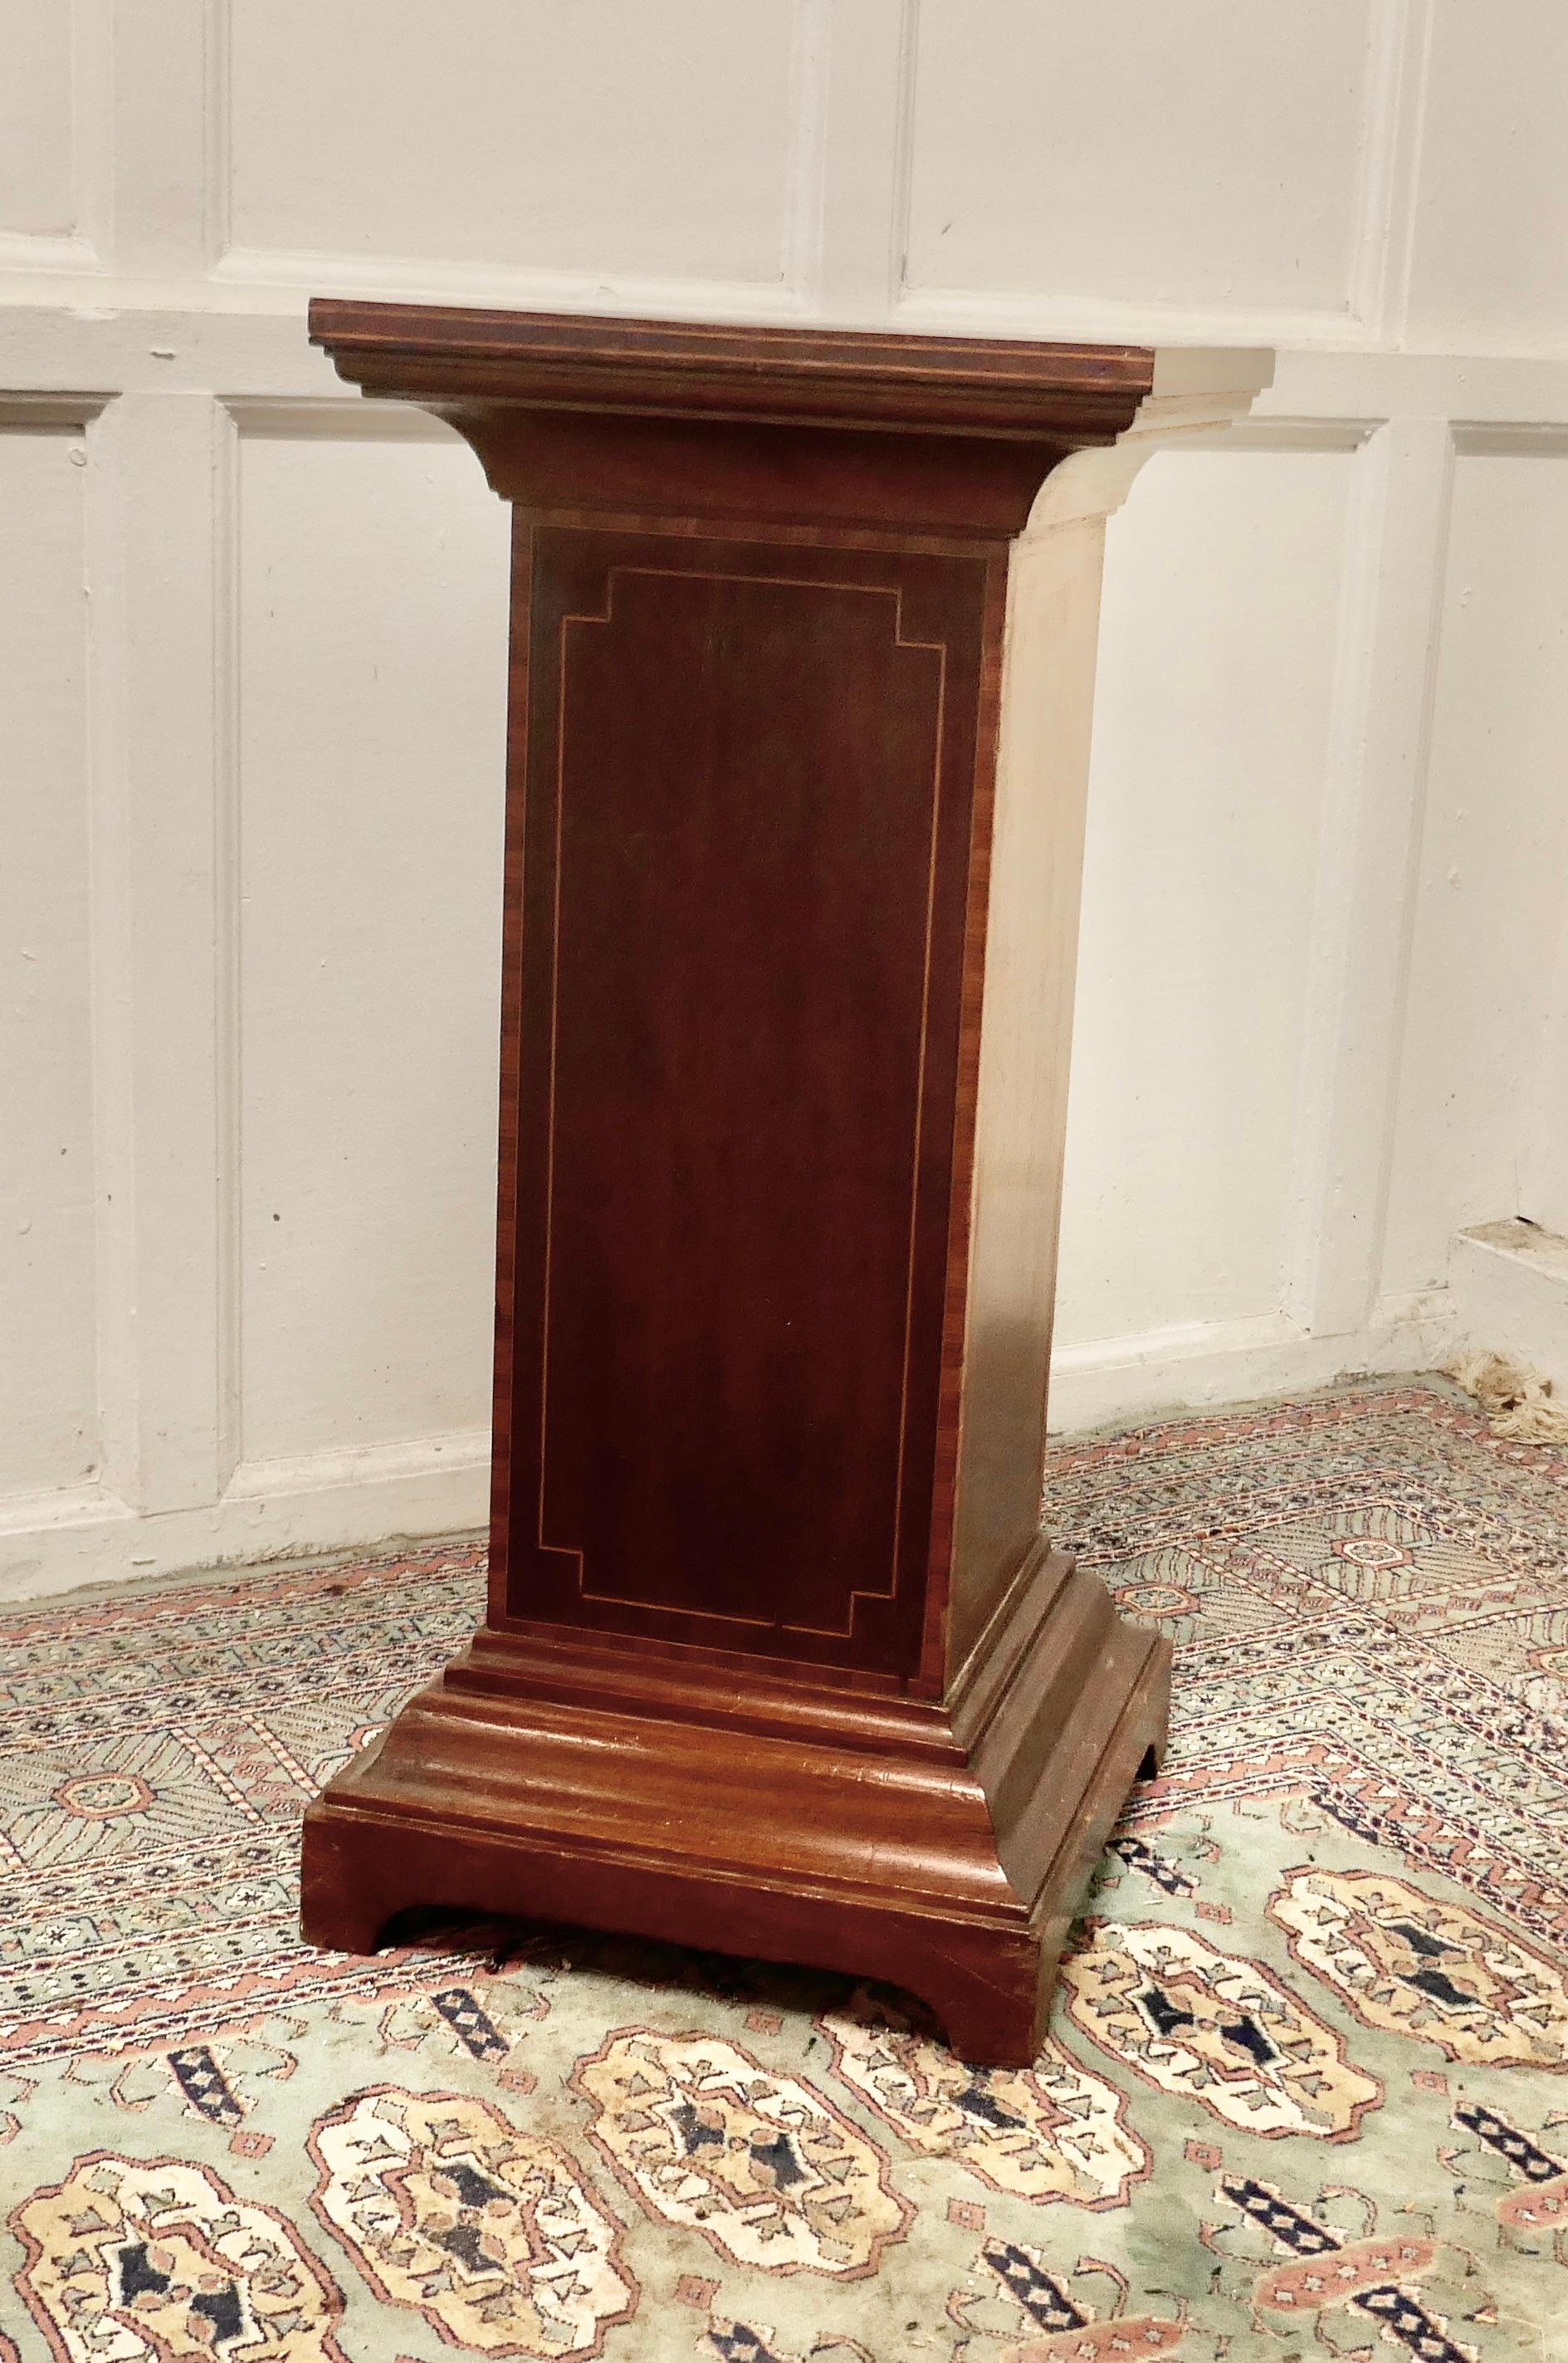 19th century French inlaid mahogany column display pedestal

This is a rectangular column, it is set on a stepped base with a square top
The Column is made in mahogany and has an inlaid border decoration, it is sound and in good used condition
